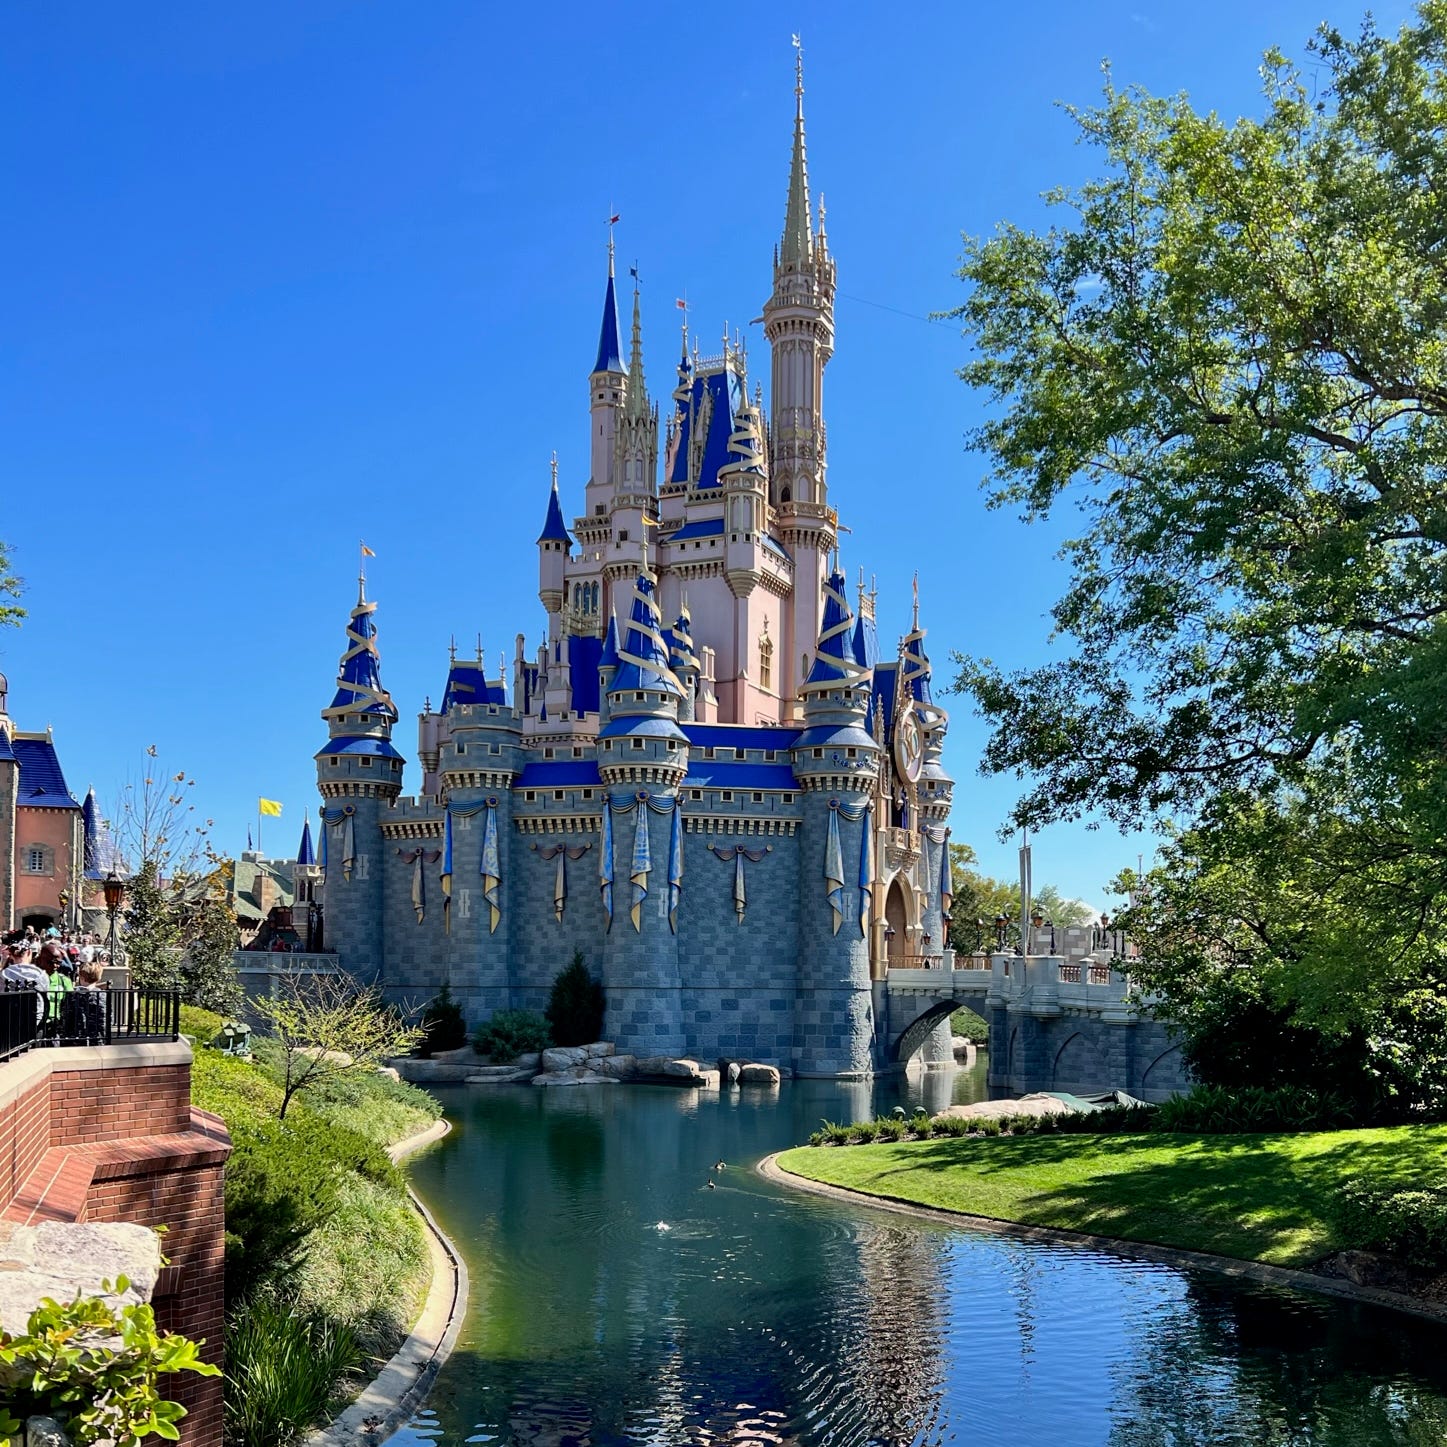 Cinderella Castle is reflected on the water near Liberty Square in Magic Kingdom.